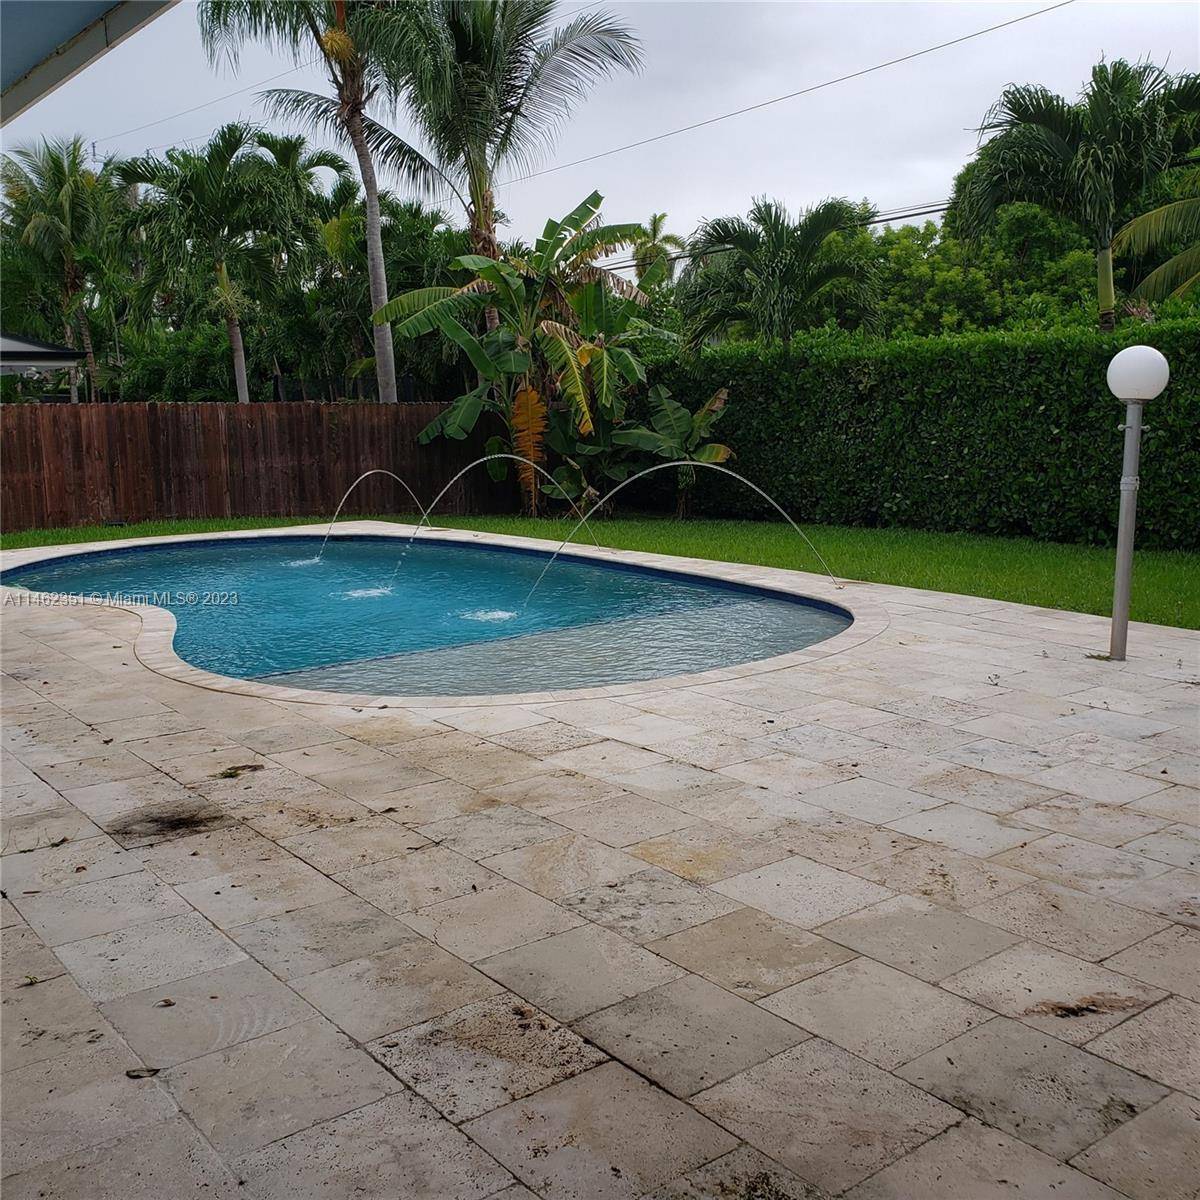 LIVE IN DESIRED SKYLAKE IN THE NORTH DADE AREA MINUTES TO AVENTURA, BEACH, I 95, US 1, TURNPIKE CENTRALLY LOCATED BETWEEN DOWNTOWN FLL AND MIAMI TRUE 4 BEDROOMS 3 FULL ...